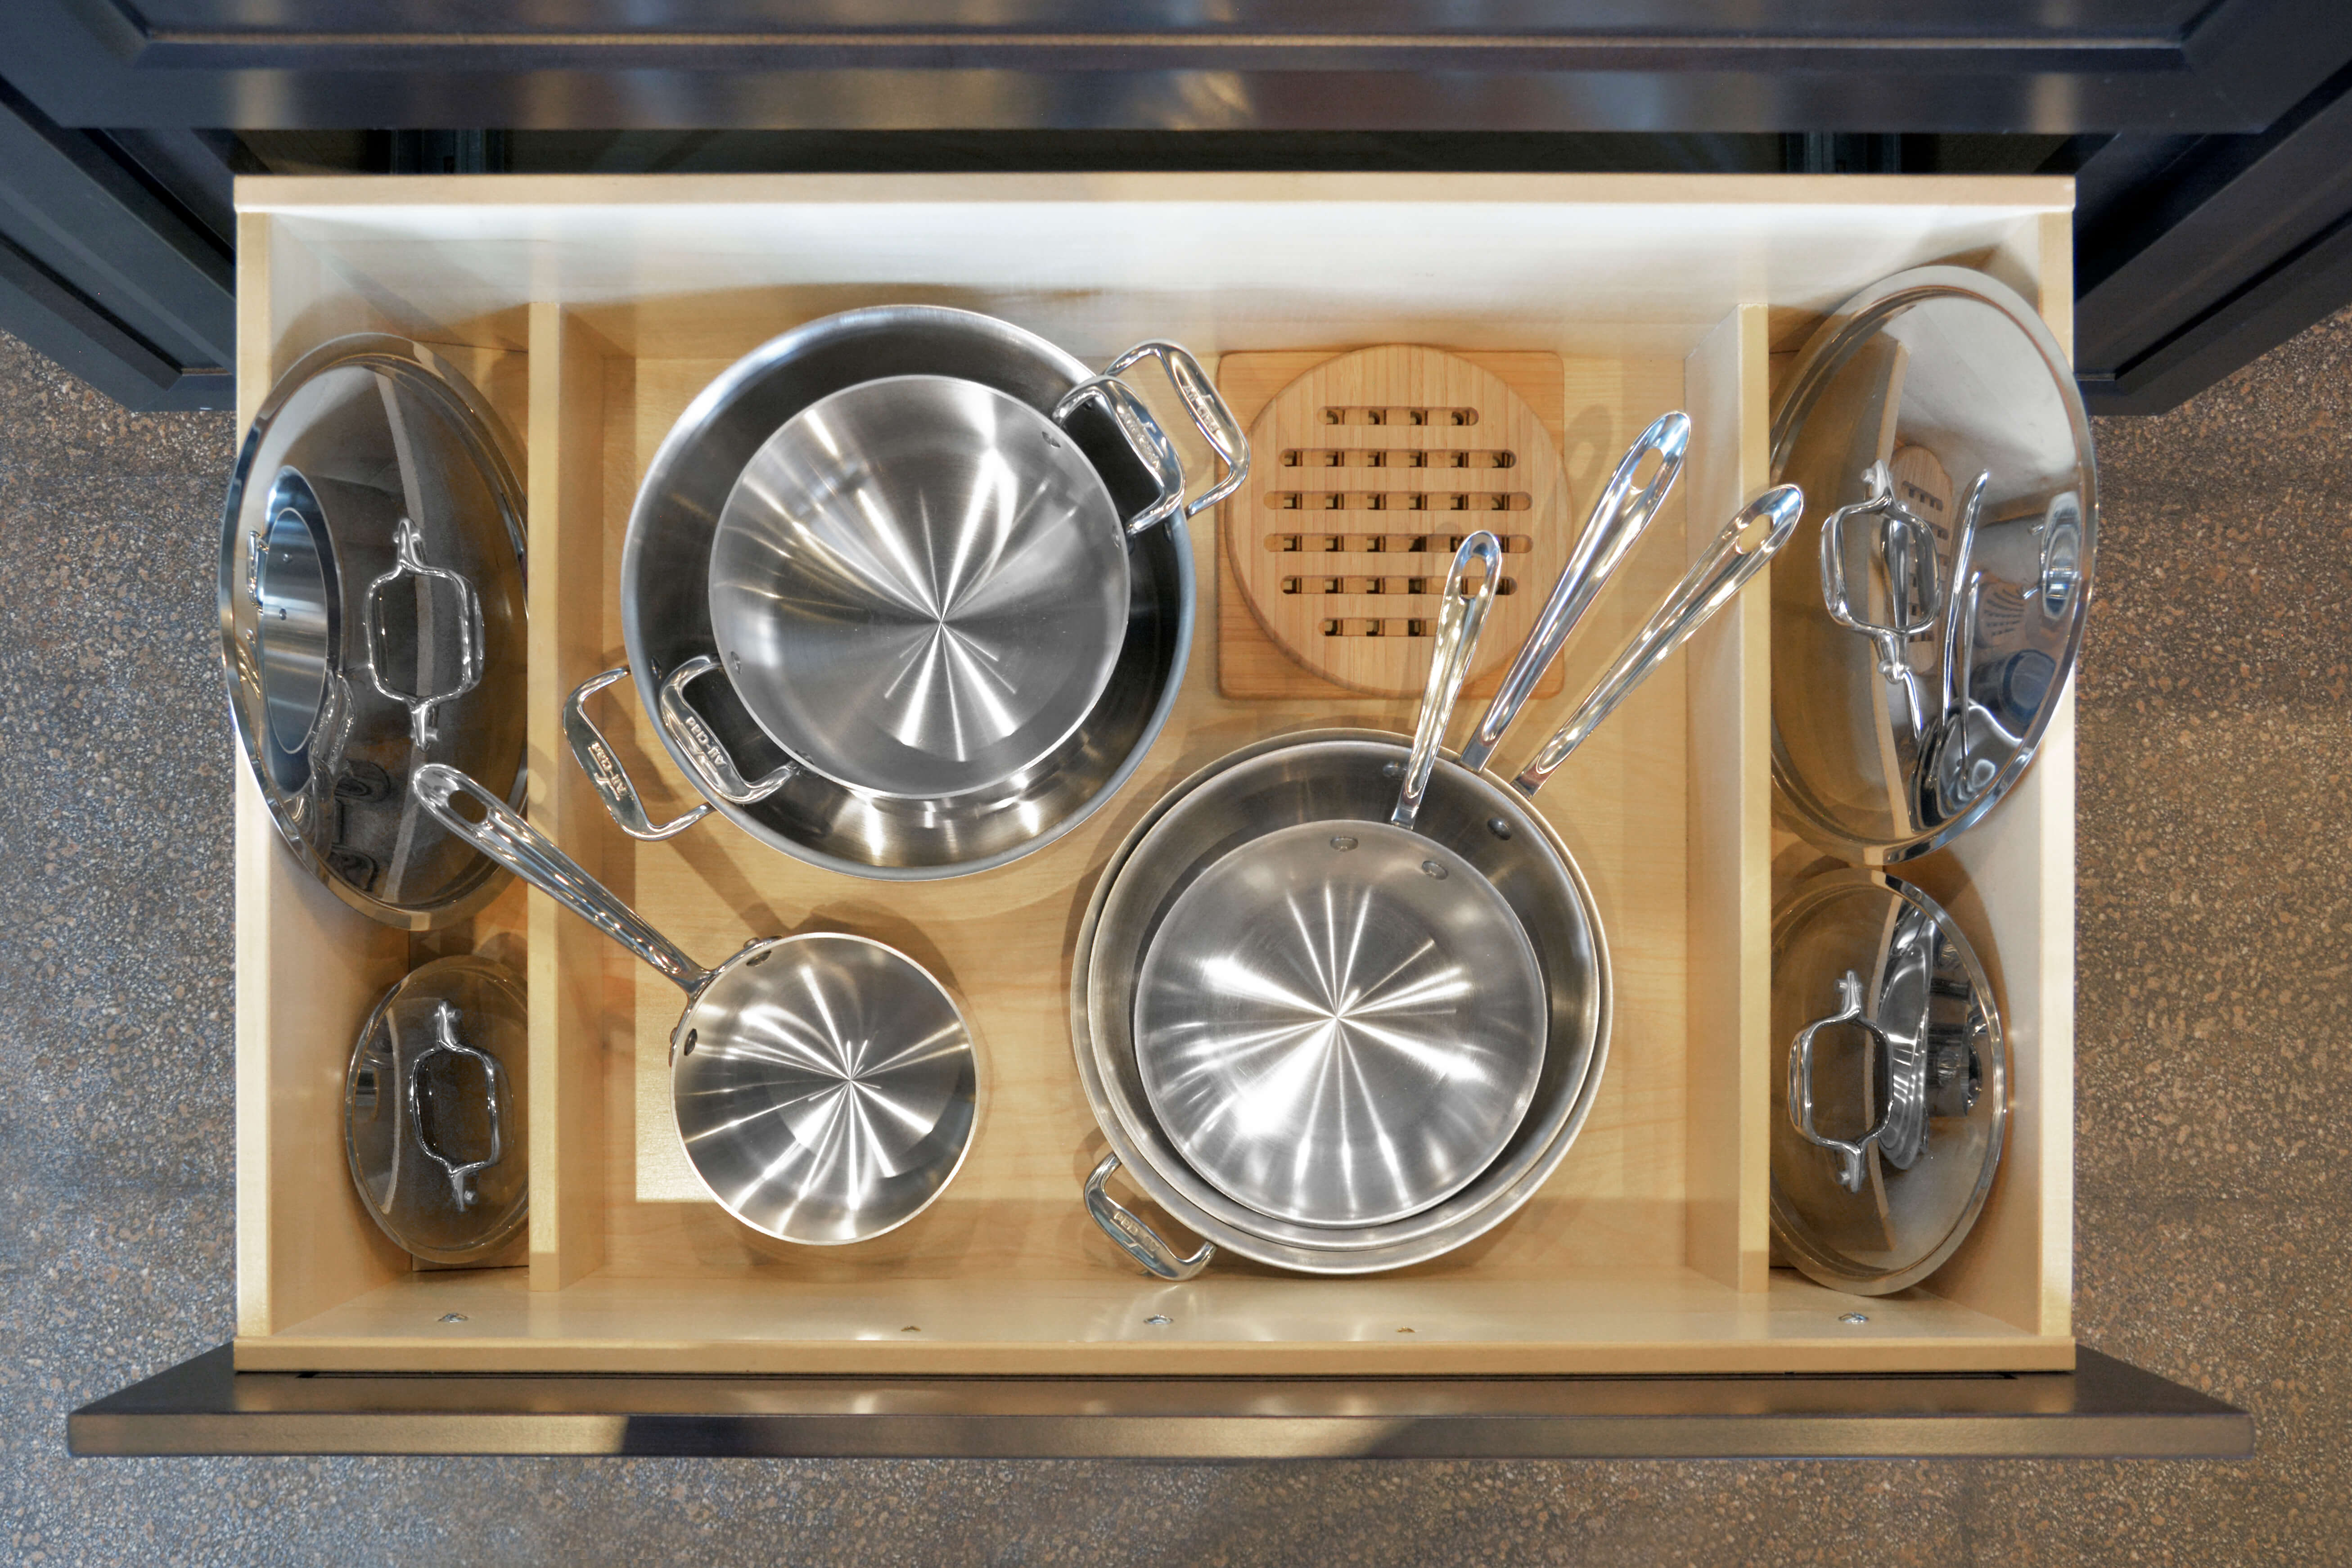 Lid dividers are built into the sides of a deep drawer for pot & pan Storage. Find kitchen storage solutions for pots & pans and organize lids with Dura Supreme Cabinetry accessories.